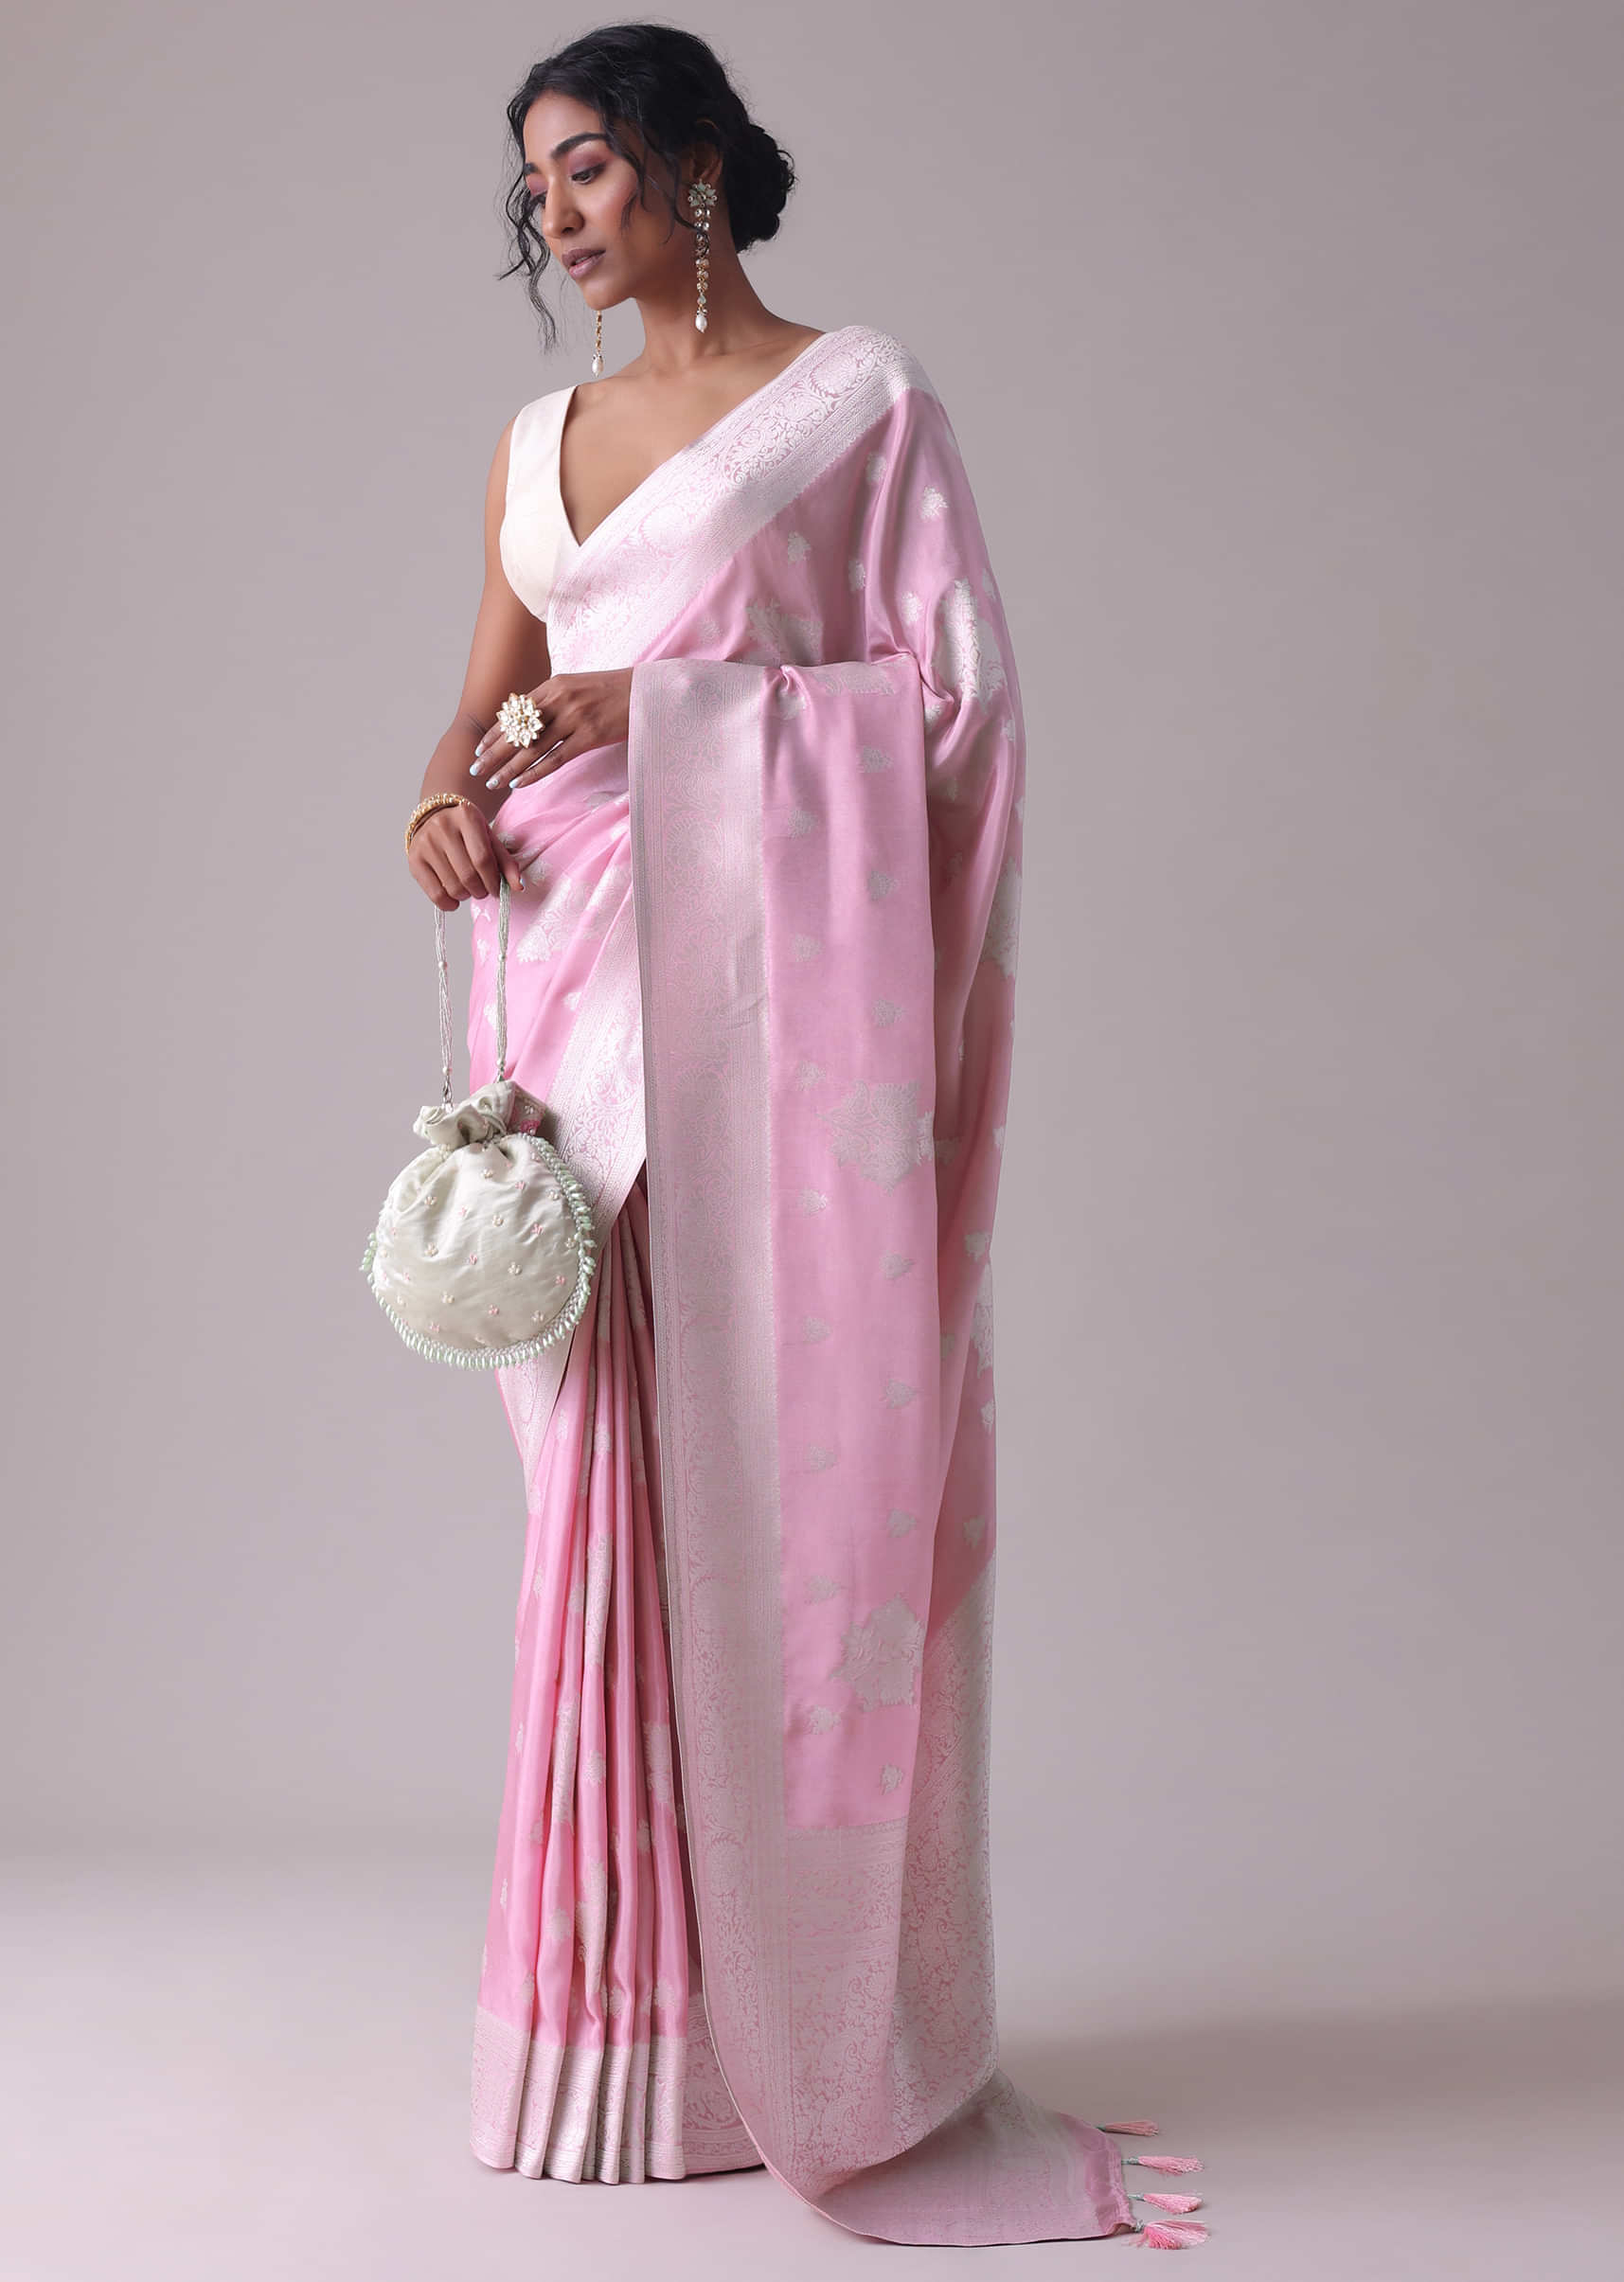 Lilac Sachet Pink Woven Saree In Dola Silk And Silver Weave